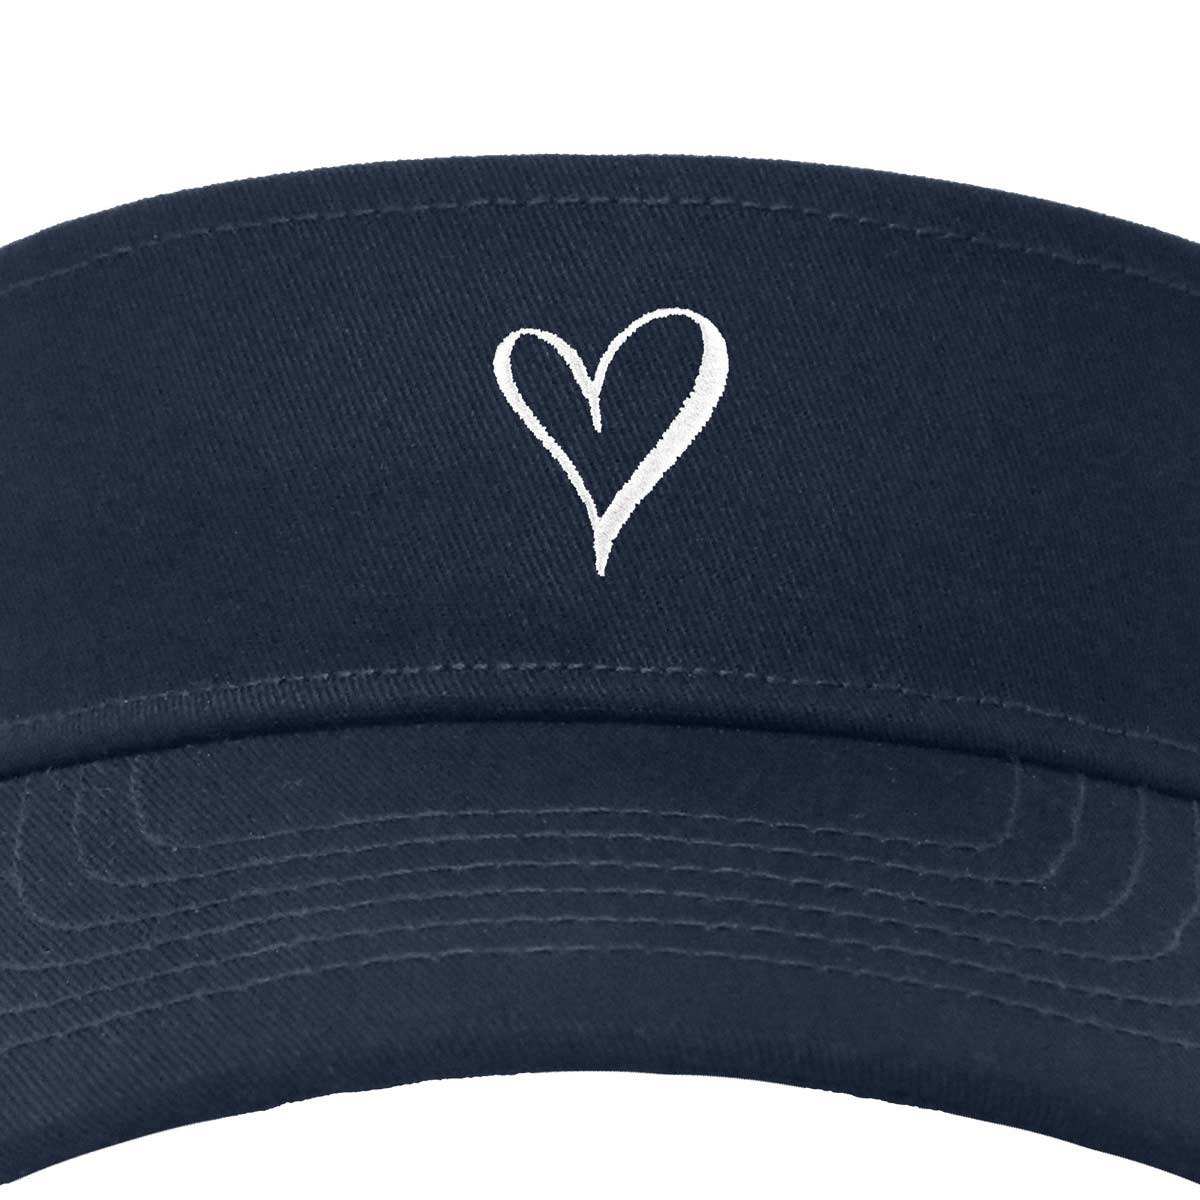 Dalix Heart Embroidered Visor Hat Adjustable Cotton Women Classic in Navy Blue